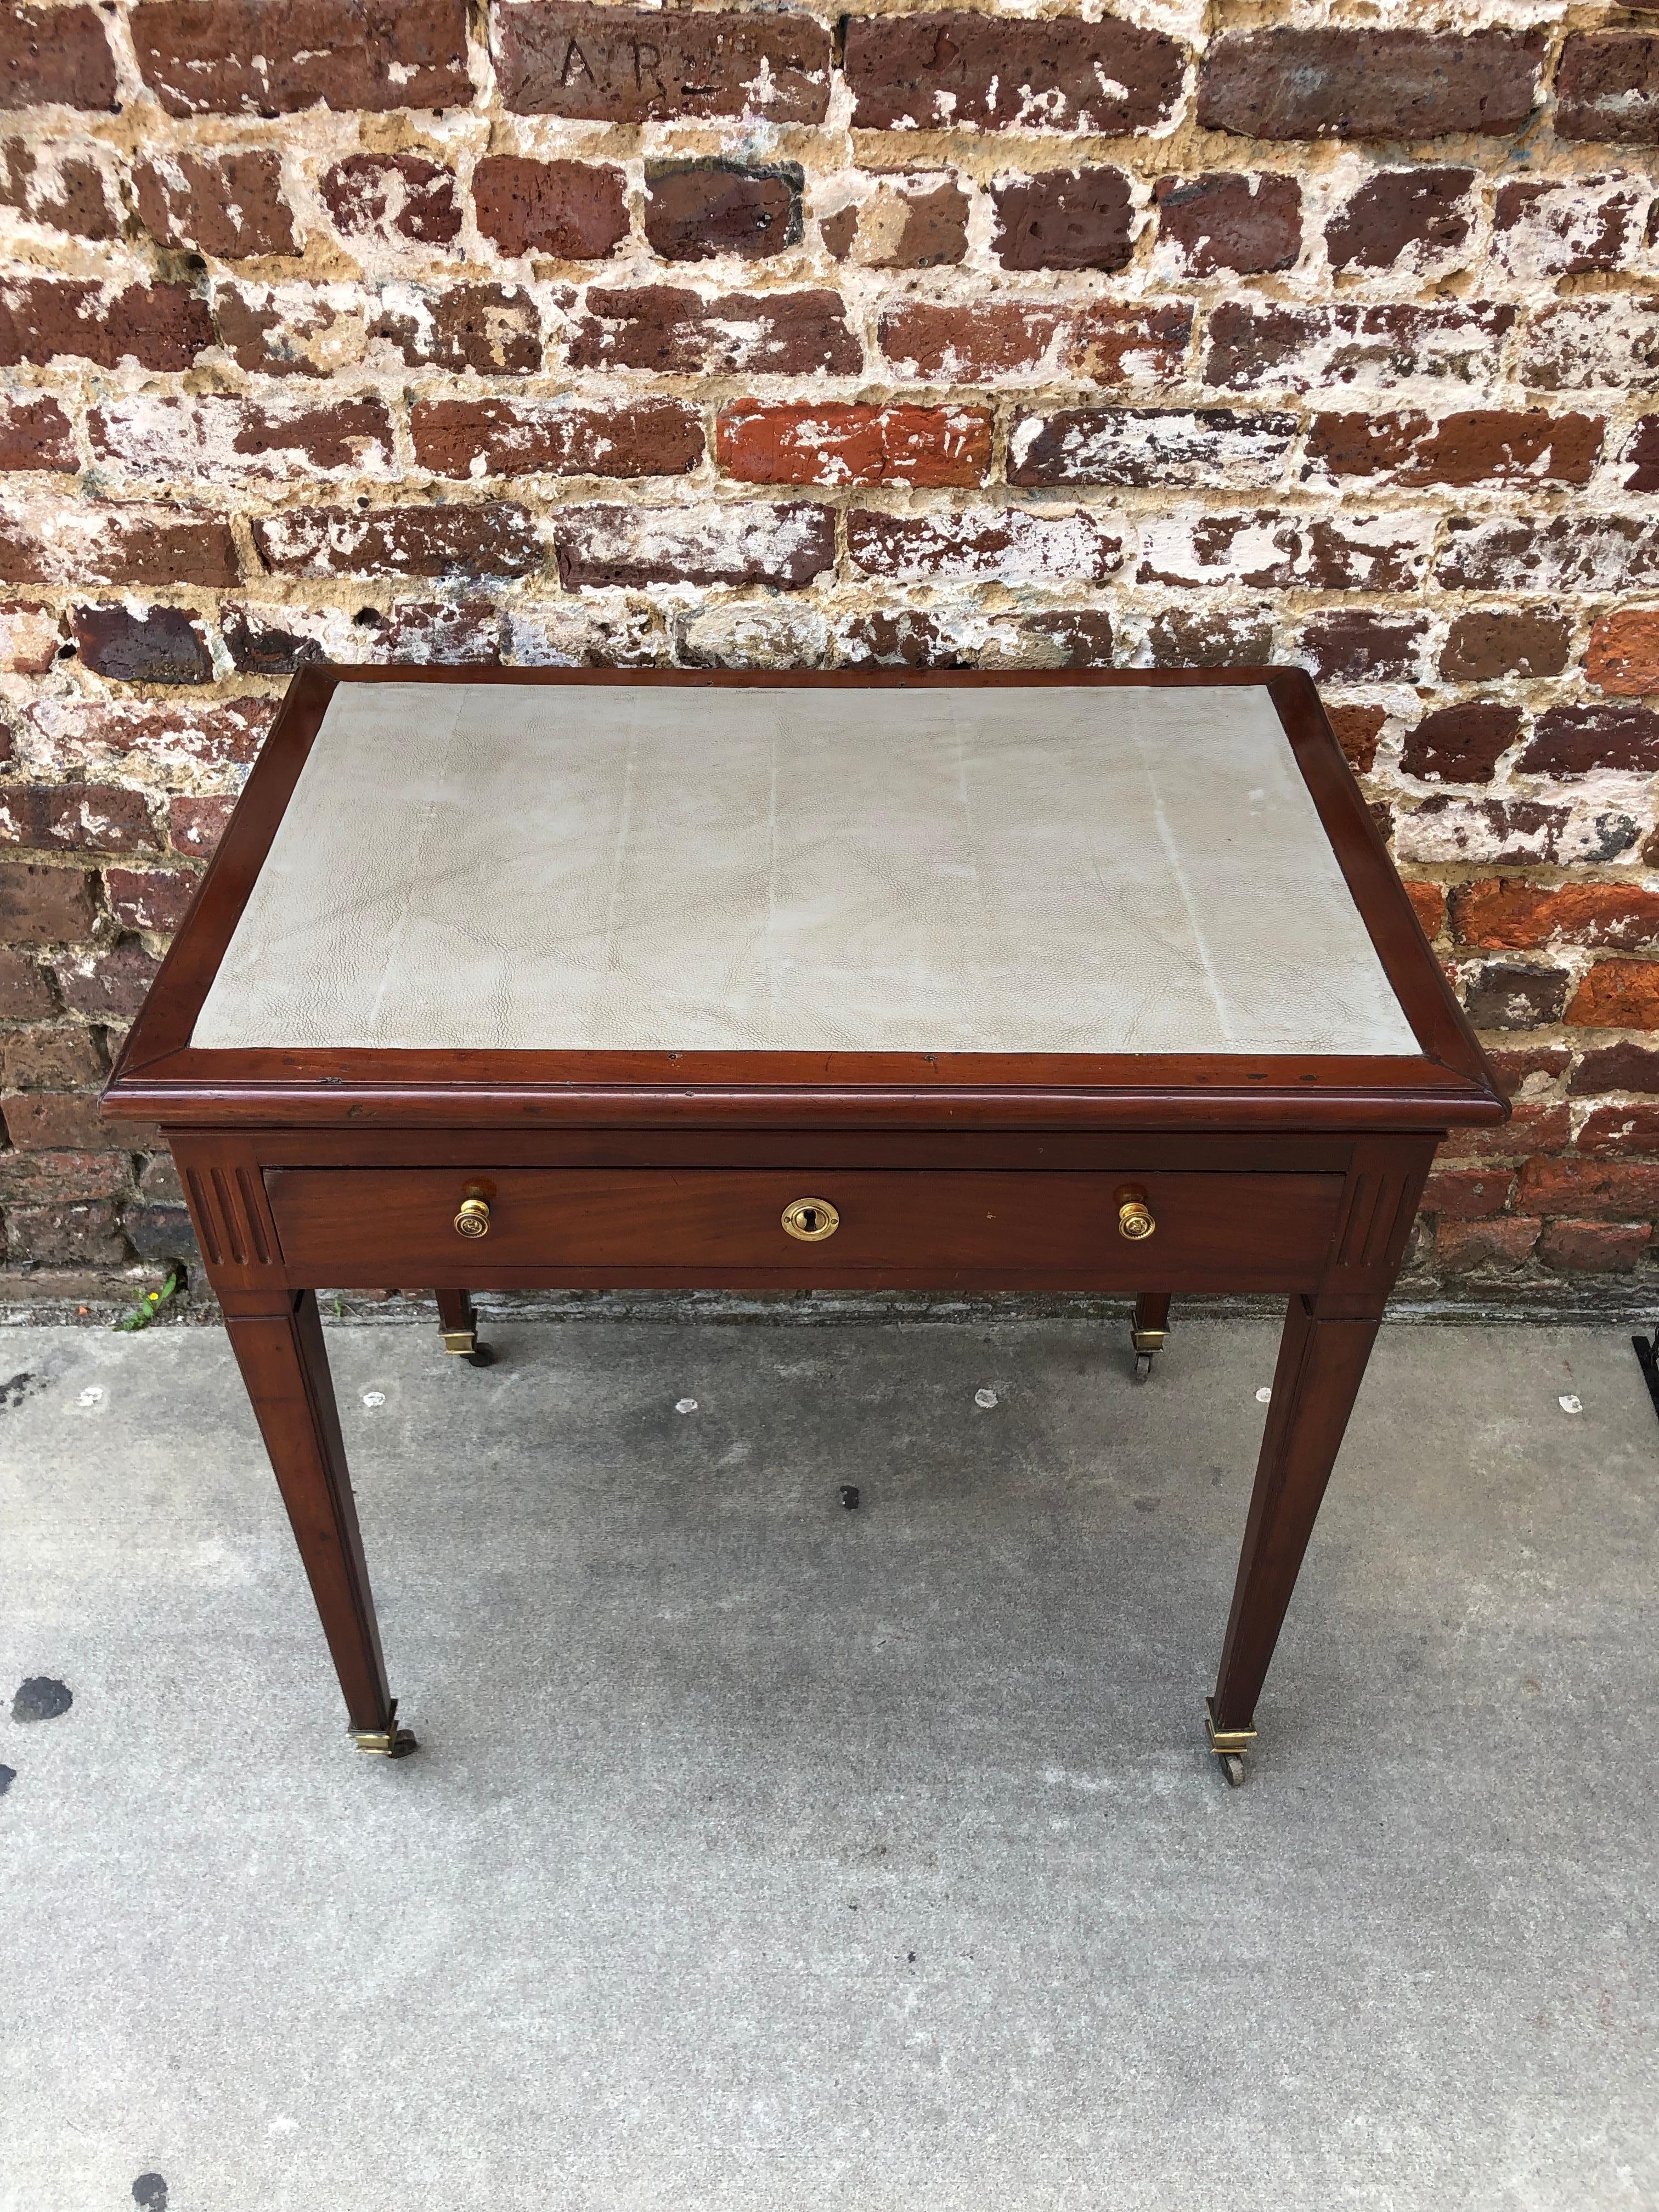 Early 19th century mahogany architects desk or drafting table. The top can be adjusted to multiple working heights.